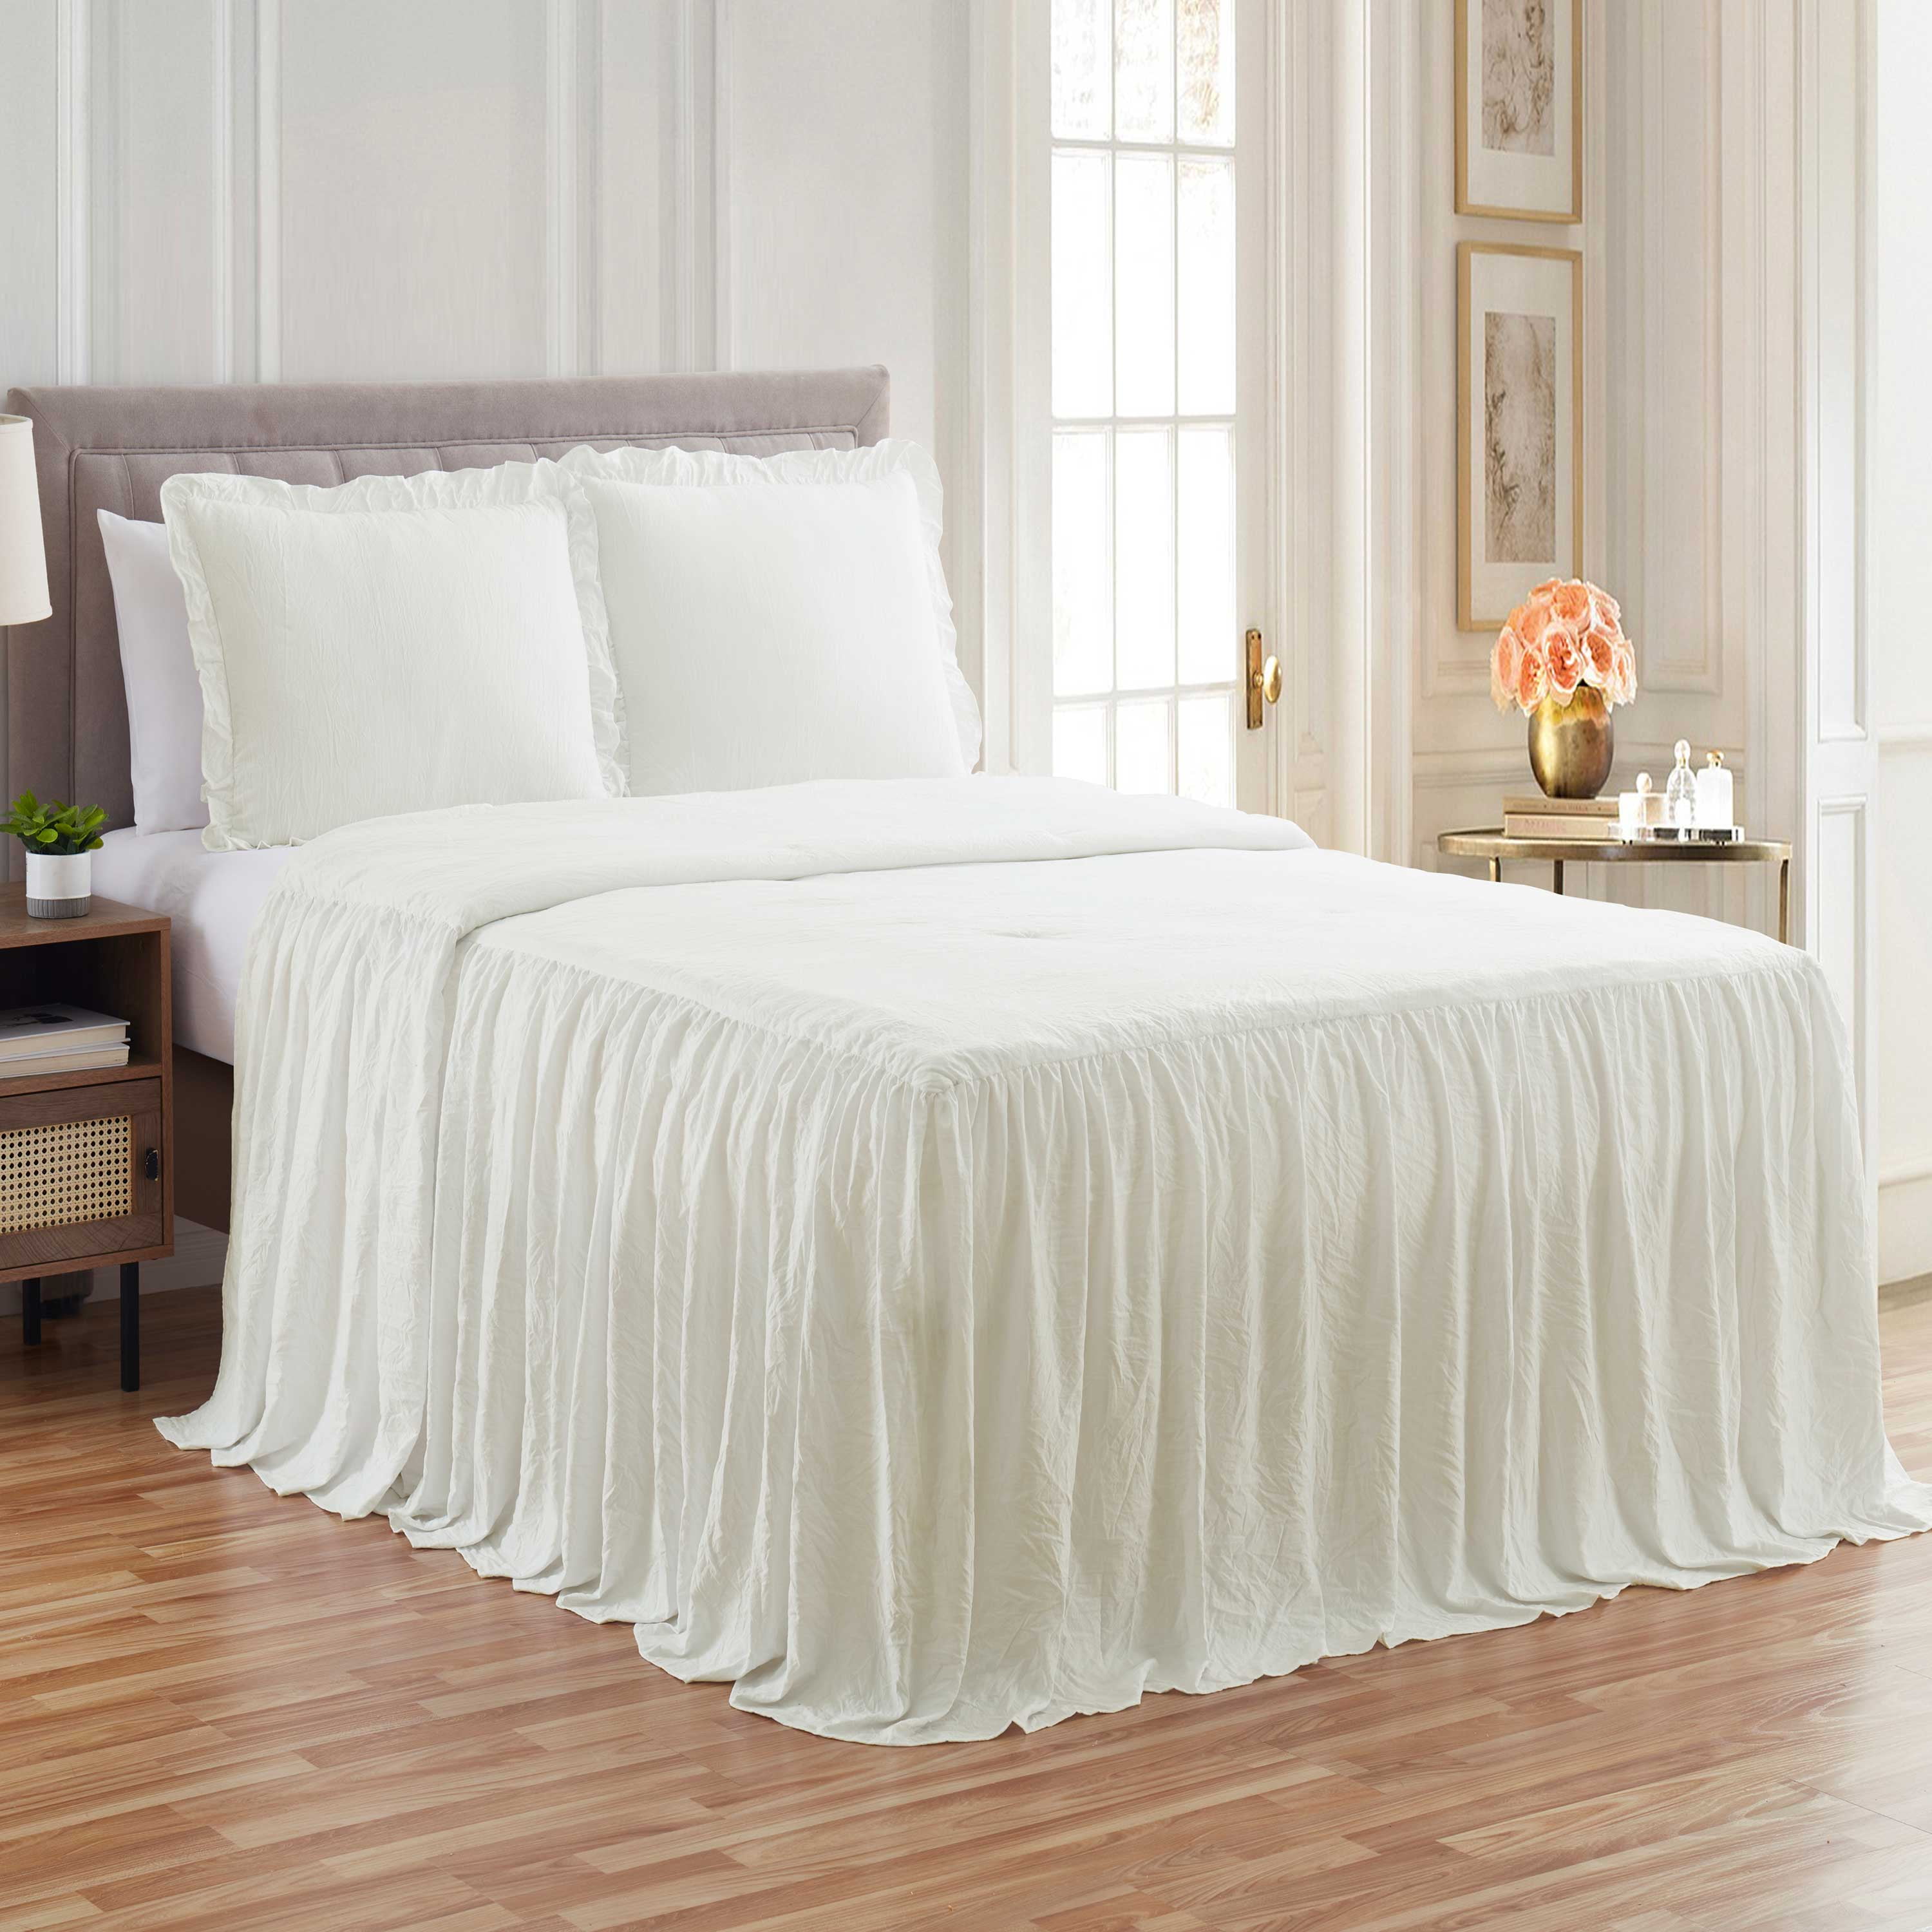 New Luxury Pin Sonic Bedspread Super Soft Quilted Throws 150X200 Wedding Gift 